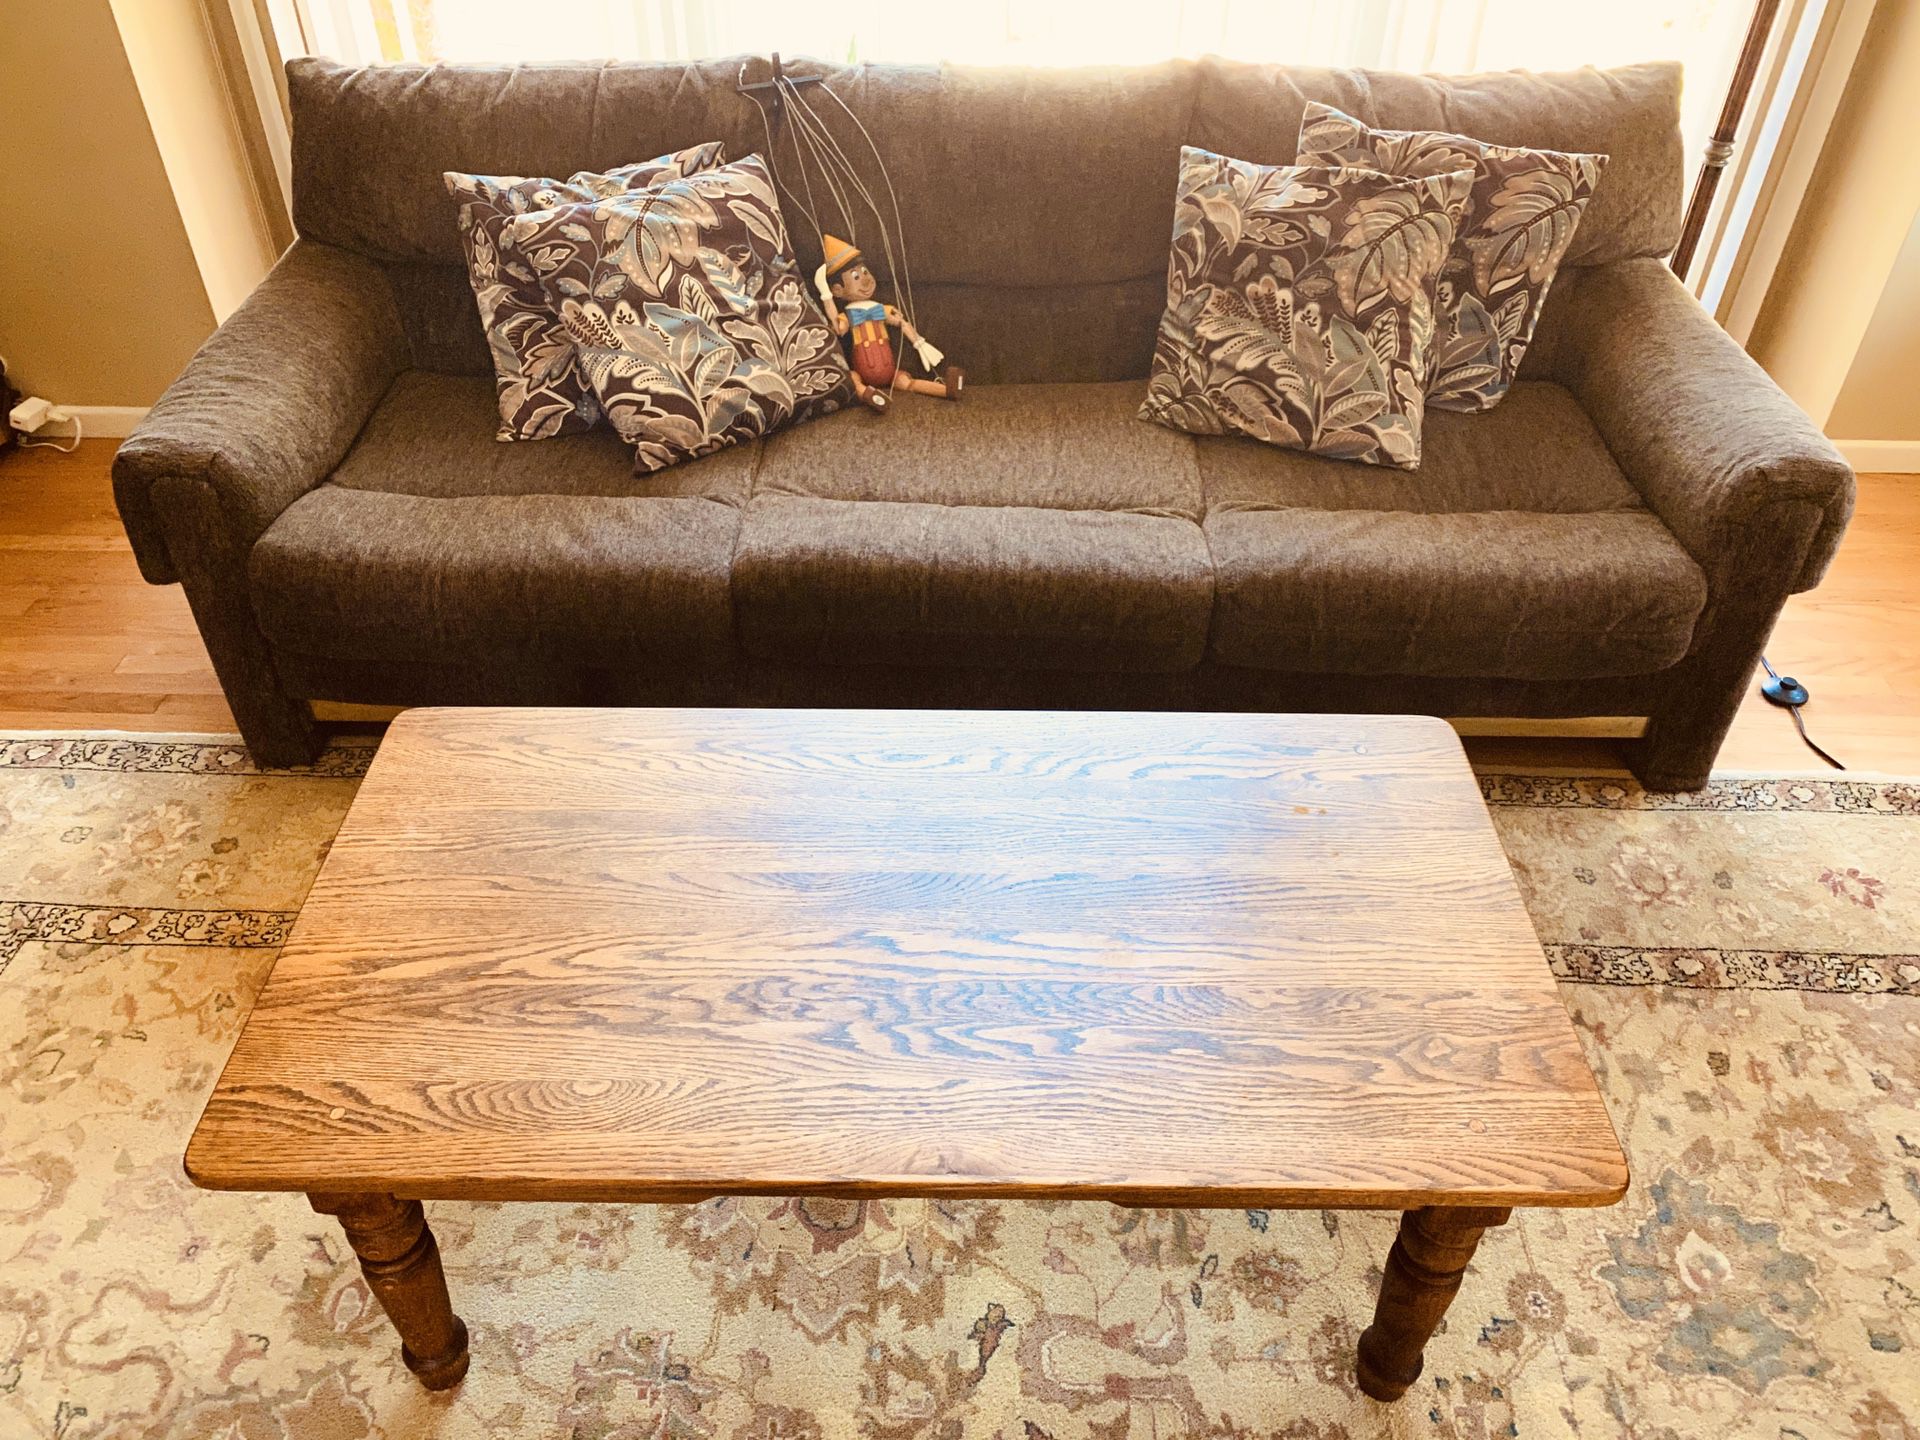 10% off Living Room set (couch and solid oak table, props not included). TP negotiable...